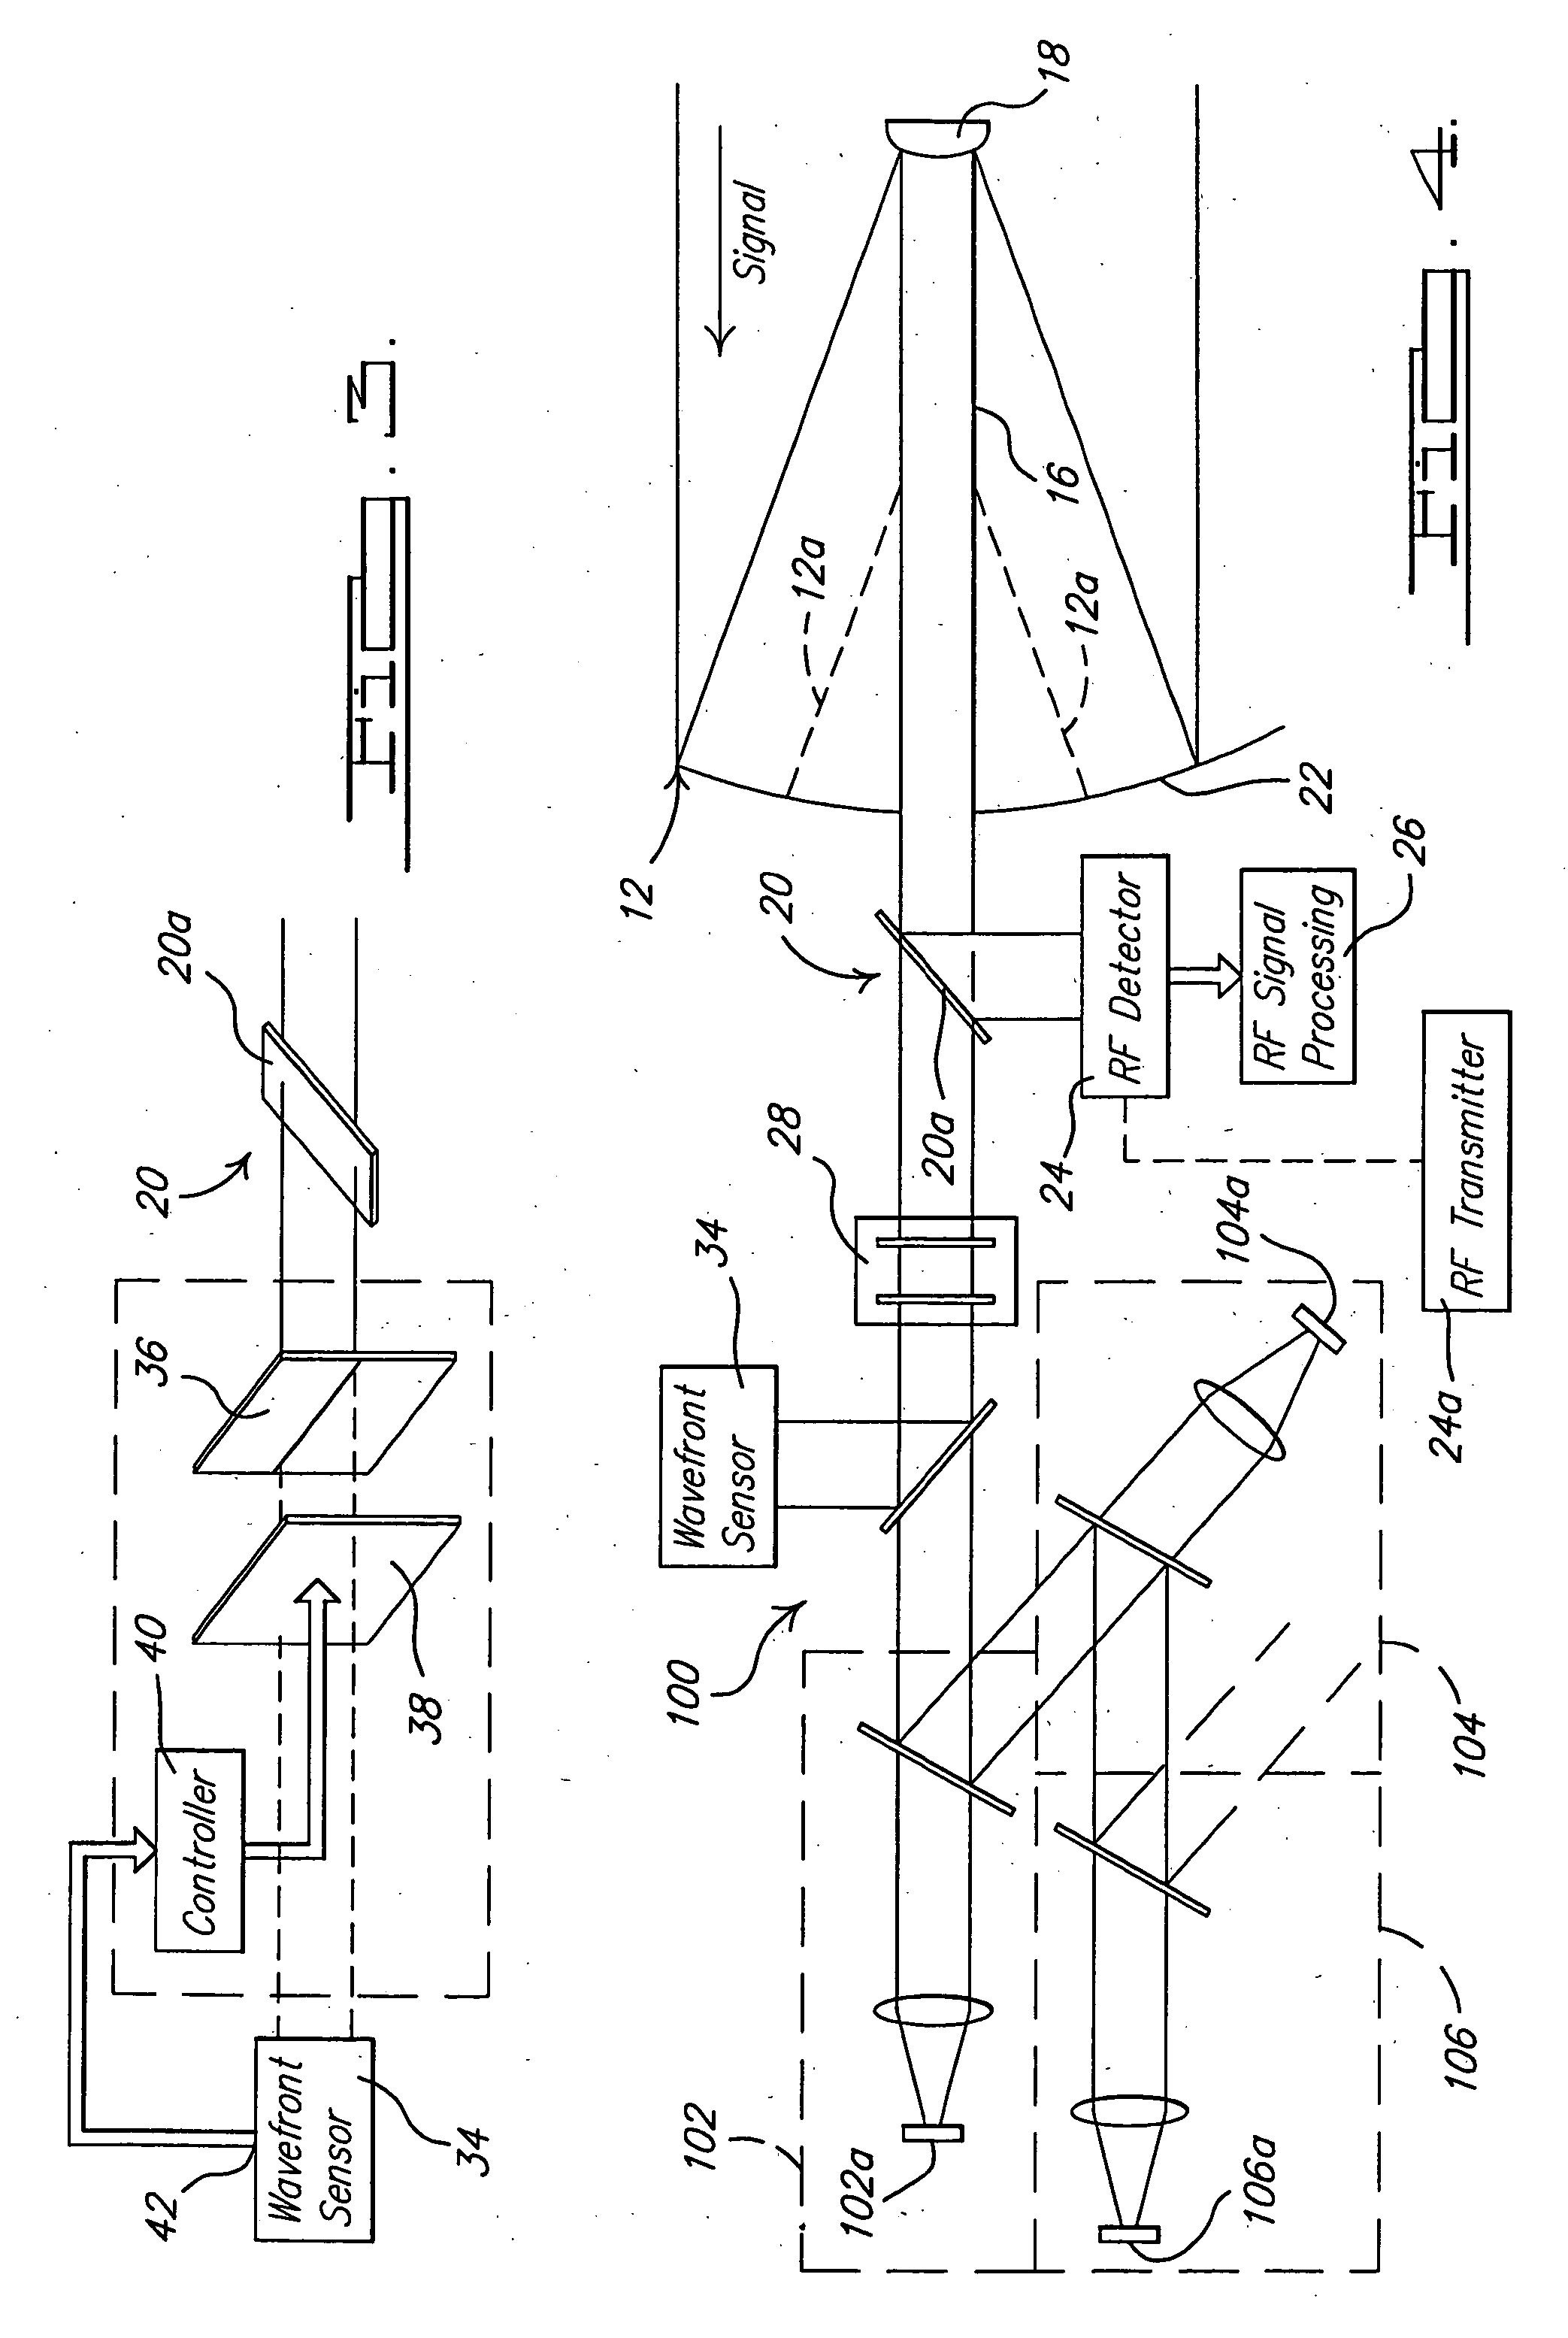 Hybrid RF/optical communication system with deployable optics and atmosphere compensation system and method